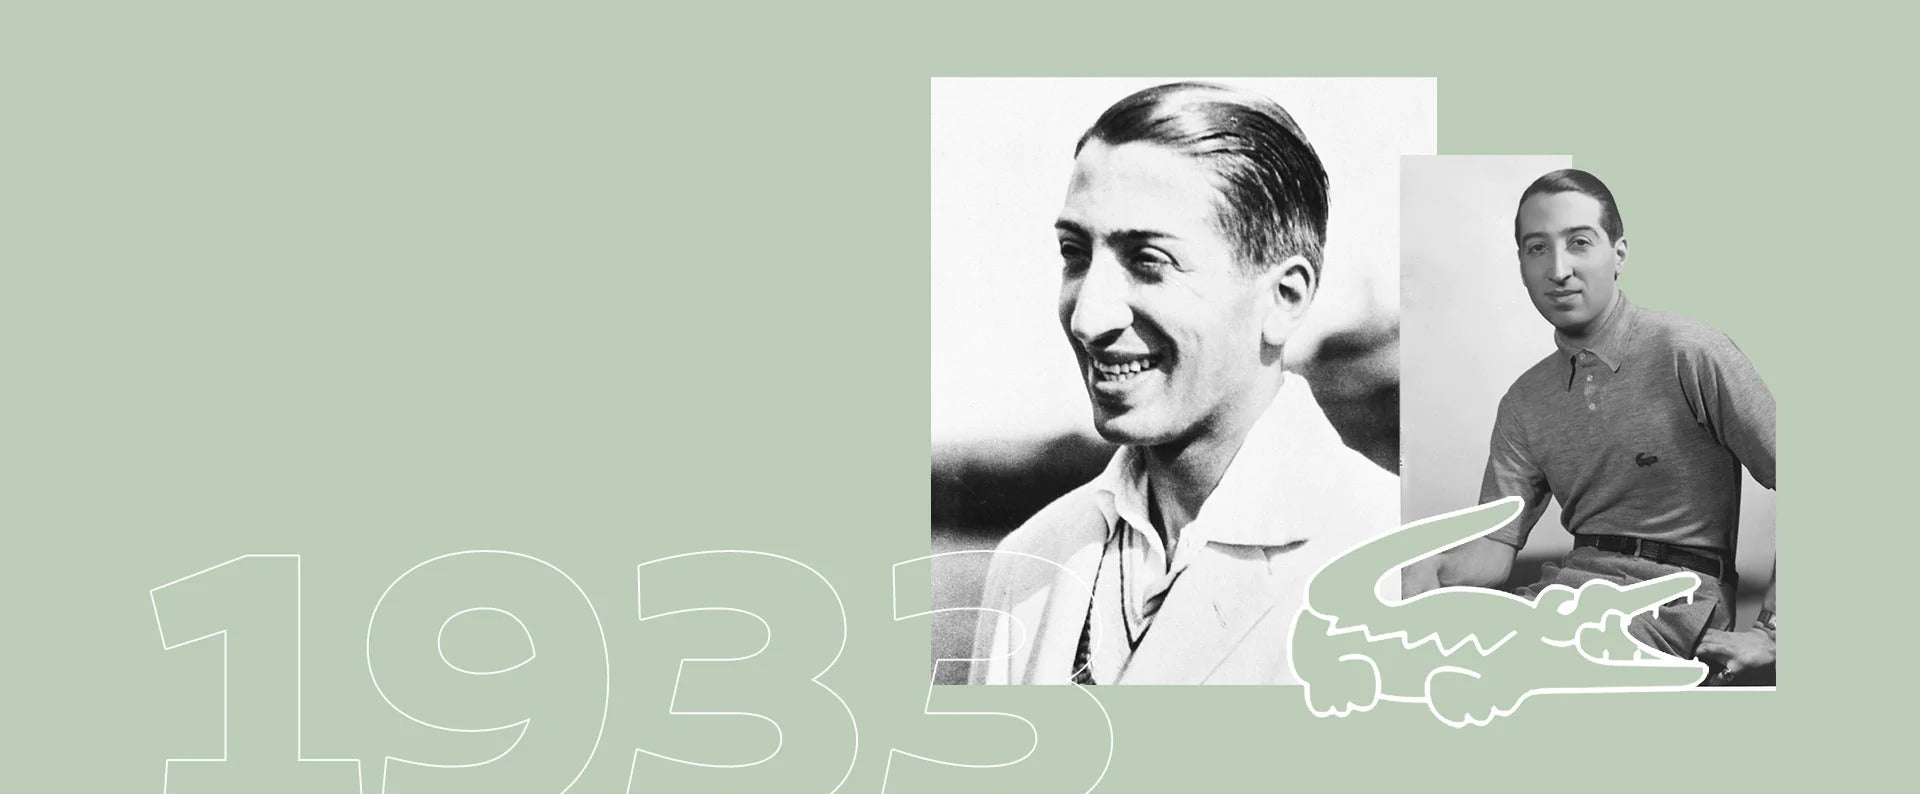 Picket Interaktion Give New Rene Lacoste – lacosteph-staging